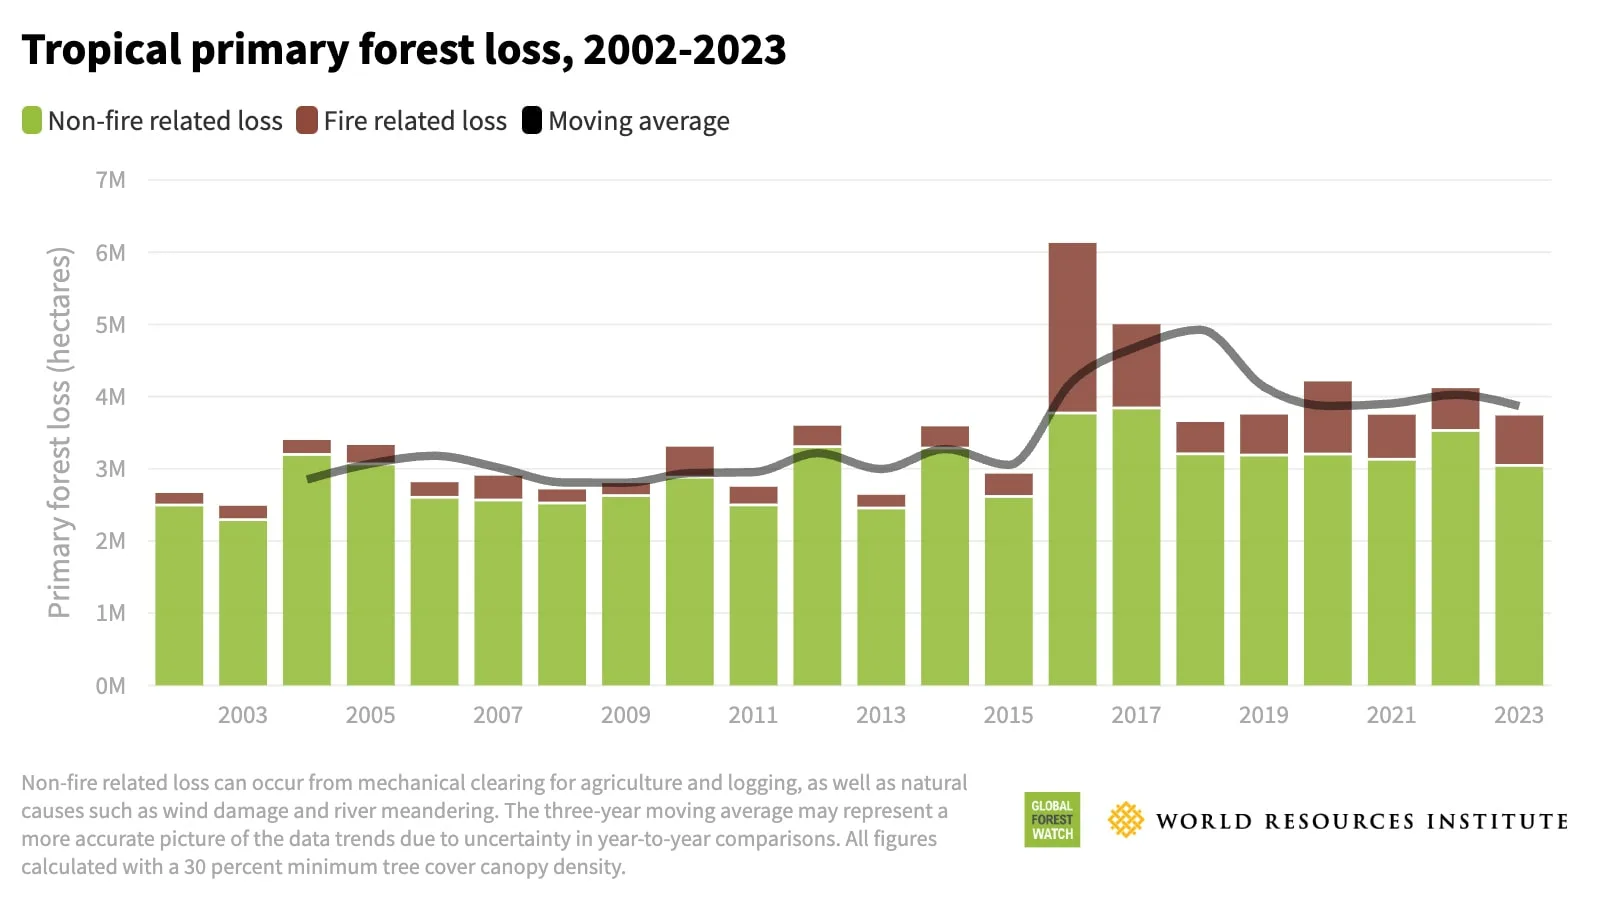 Tropical Primary Forest Loss 2023 Statistics from World Resources Institute WRI